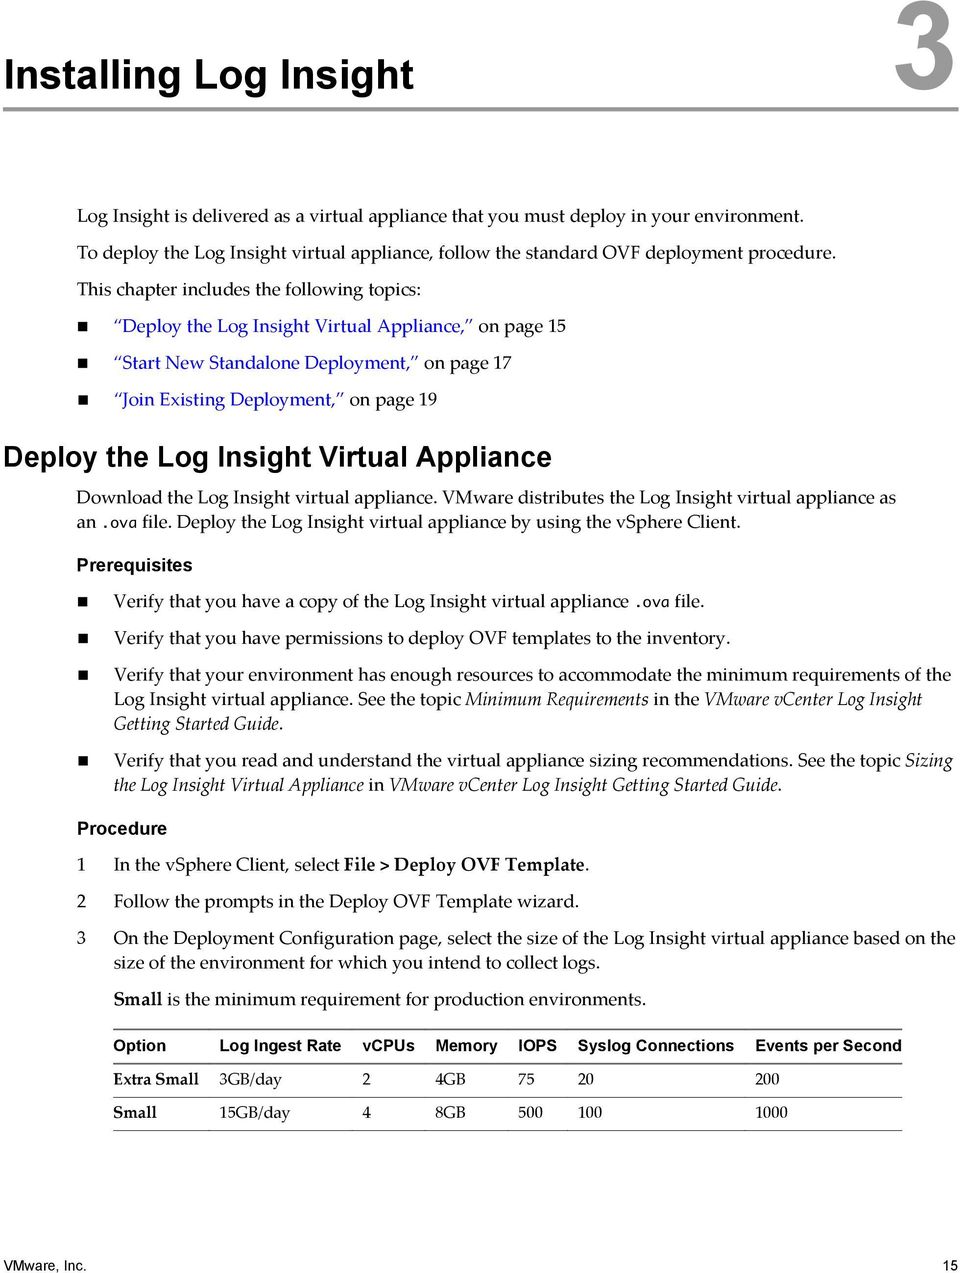 This chapter includes the following topics: Deploy the Log Insight Virtual Appliance, on page 15 Start New Standalone Deployment, on page 17 Join Existing Deployment, on page 19 Deploy the Log